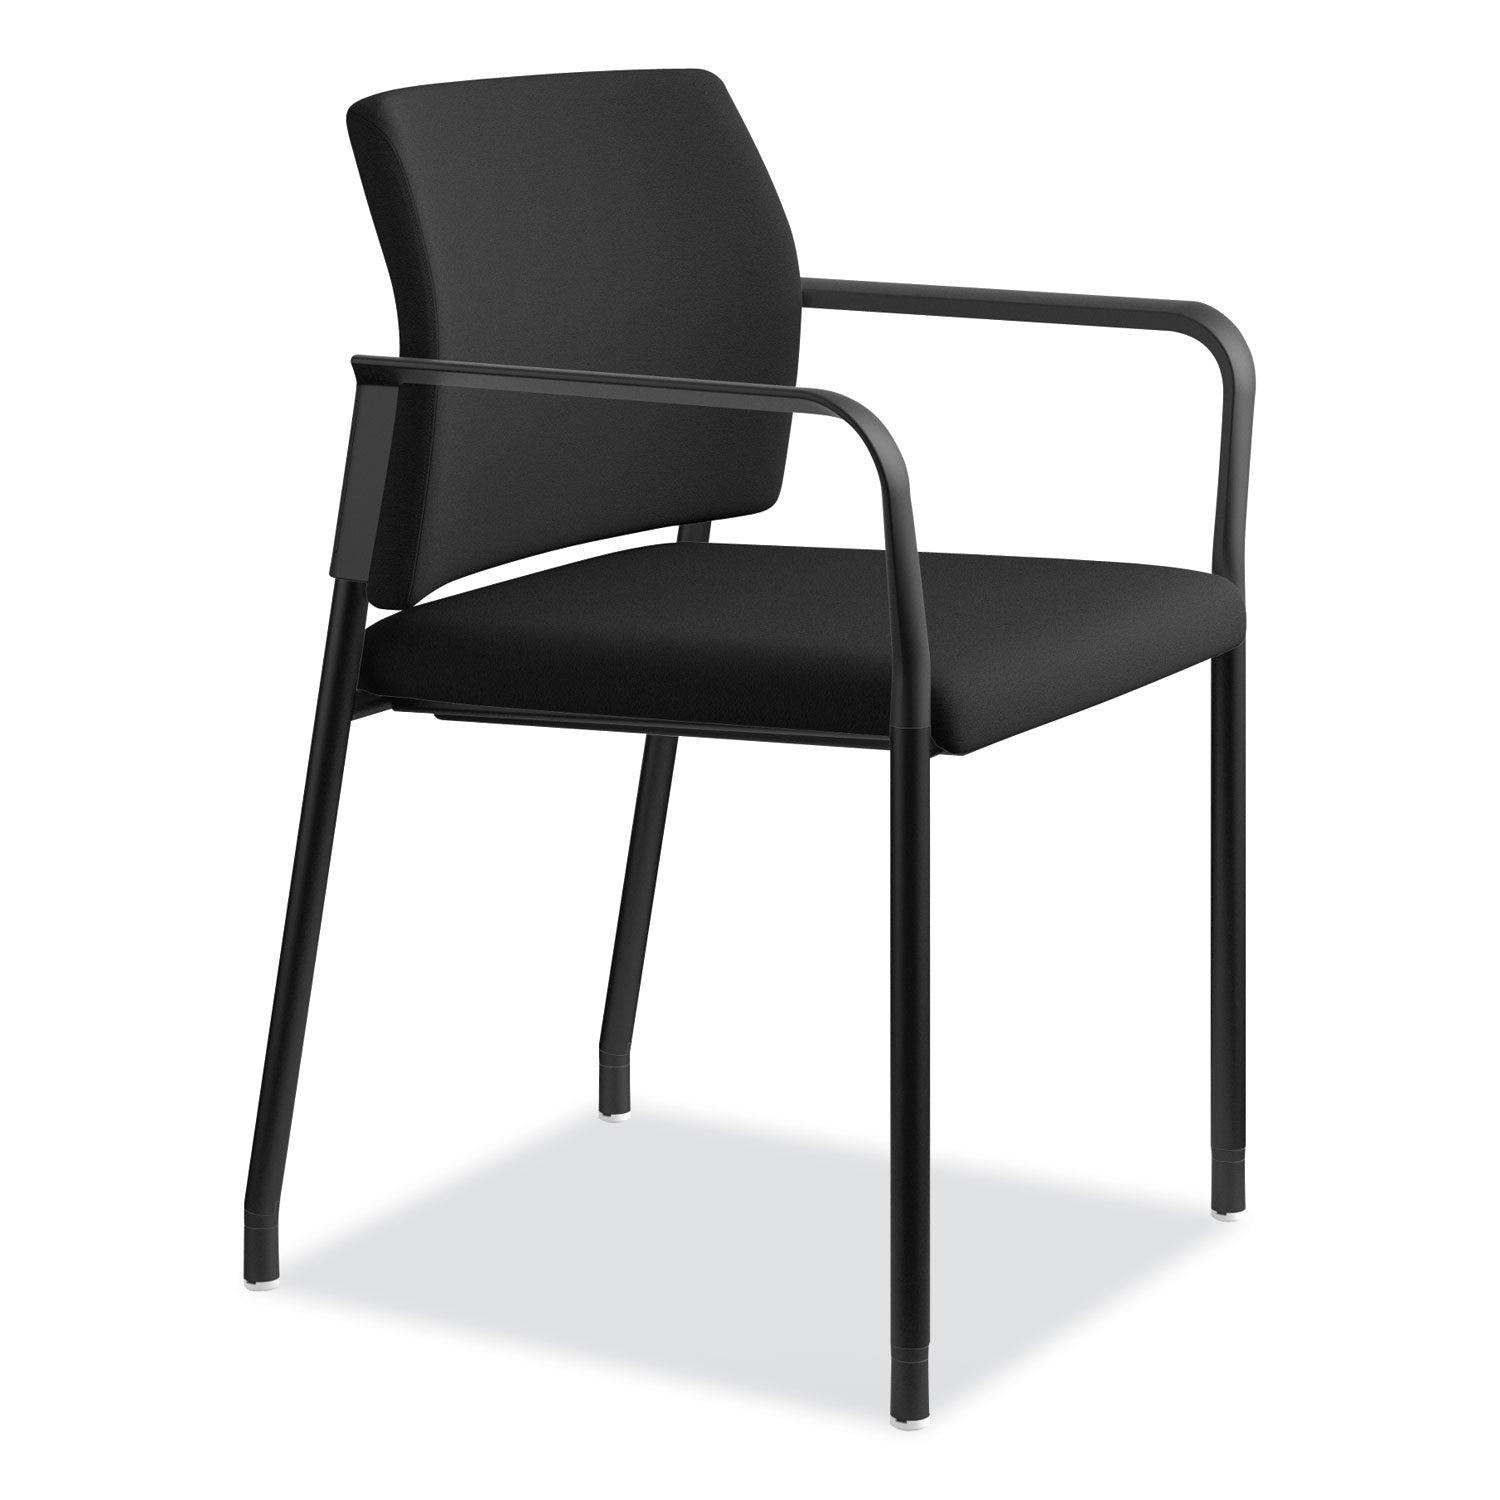 accommodate-series-guest-chair-with-arms-fabric-upholstery-2325-x-2225-x-32-black-seat-back-charblack-legs-2-carton_honsgs6fbc10c - 2